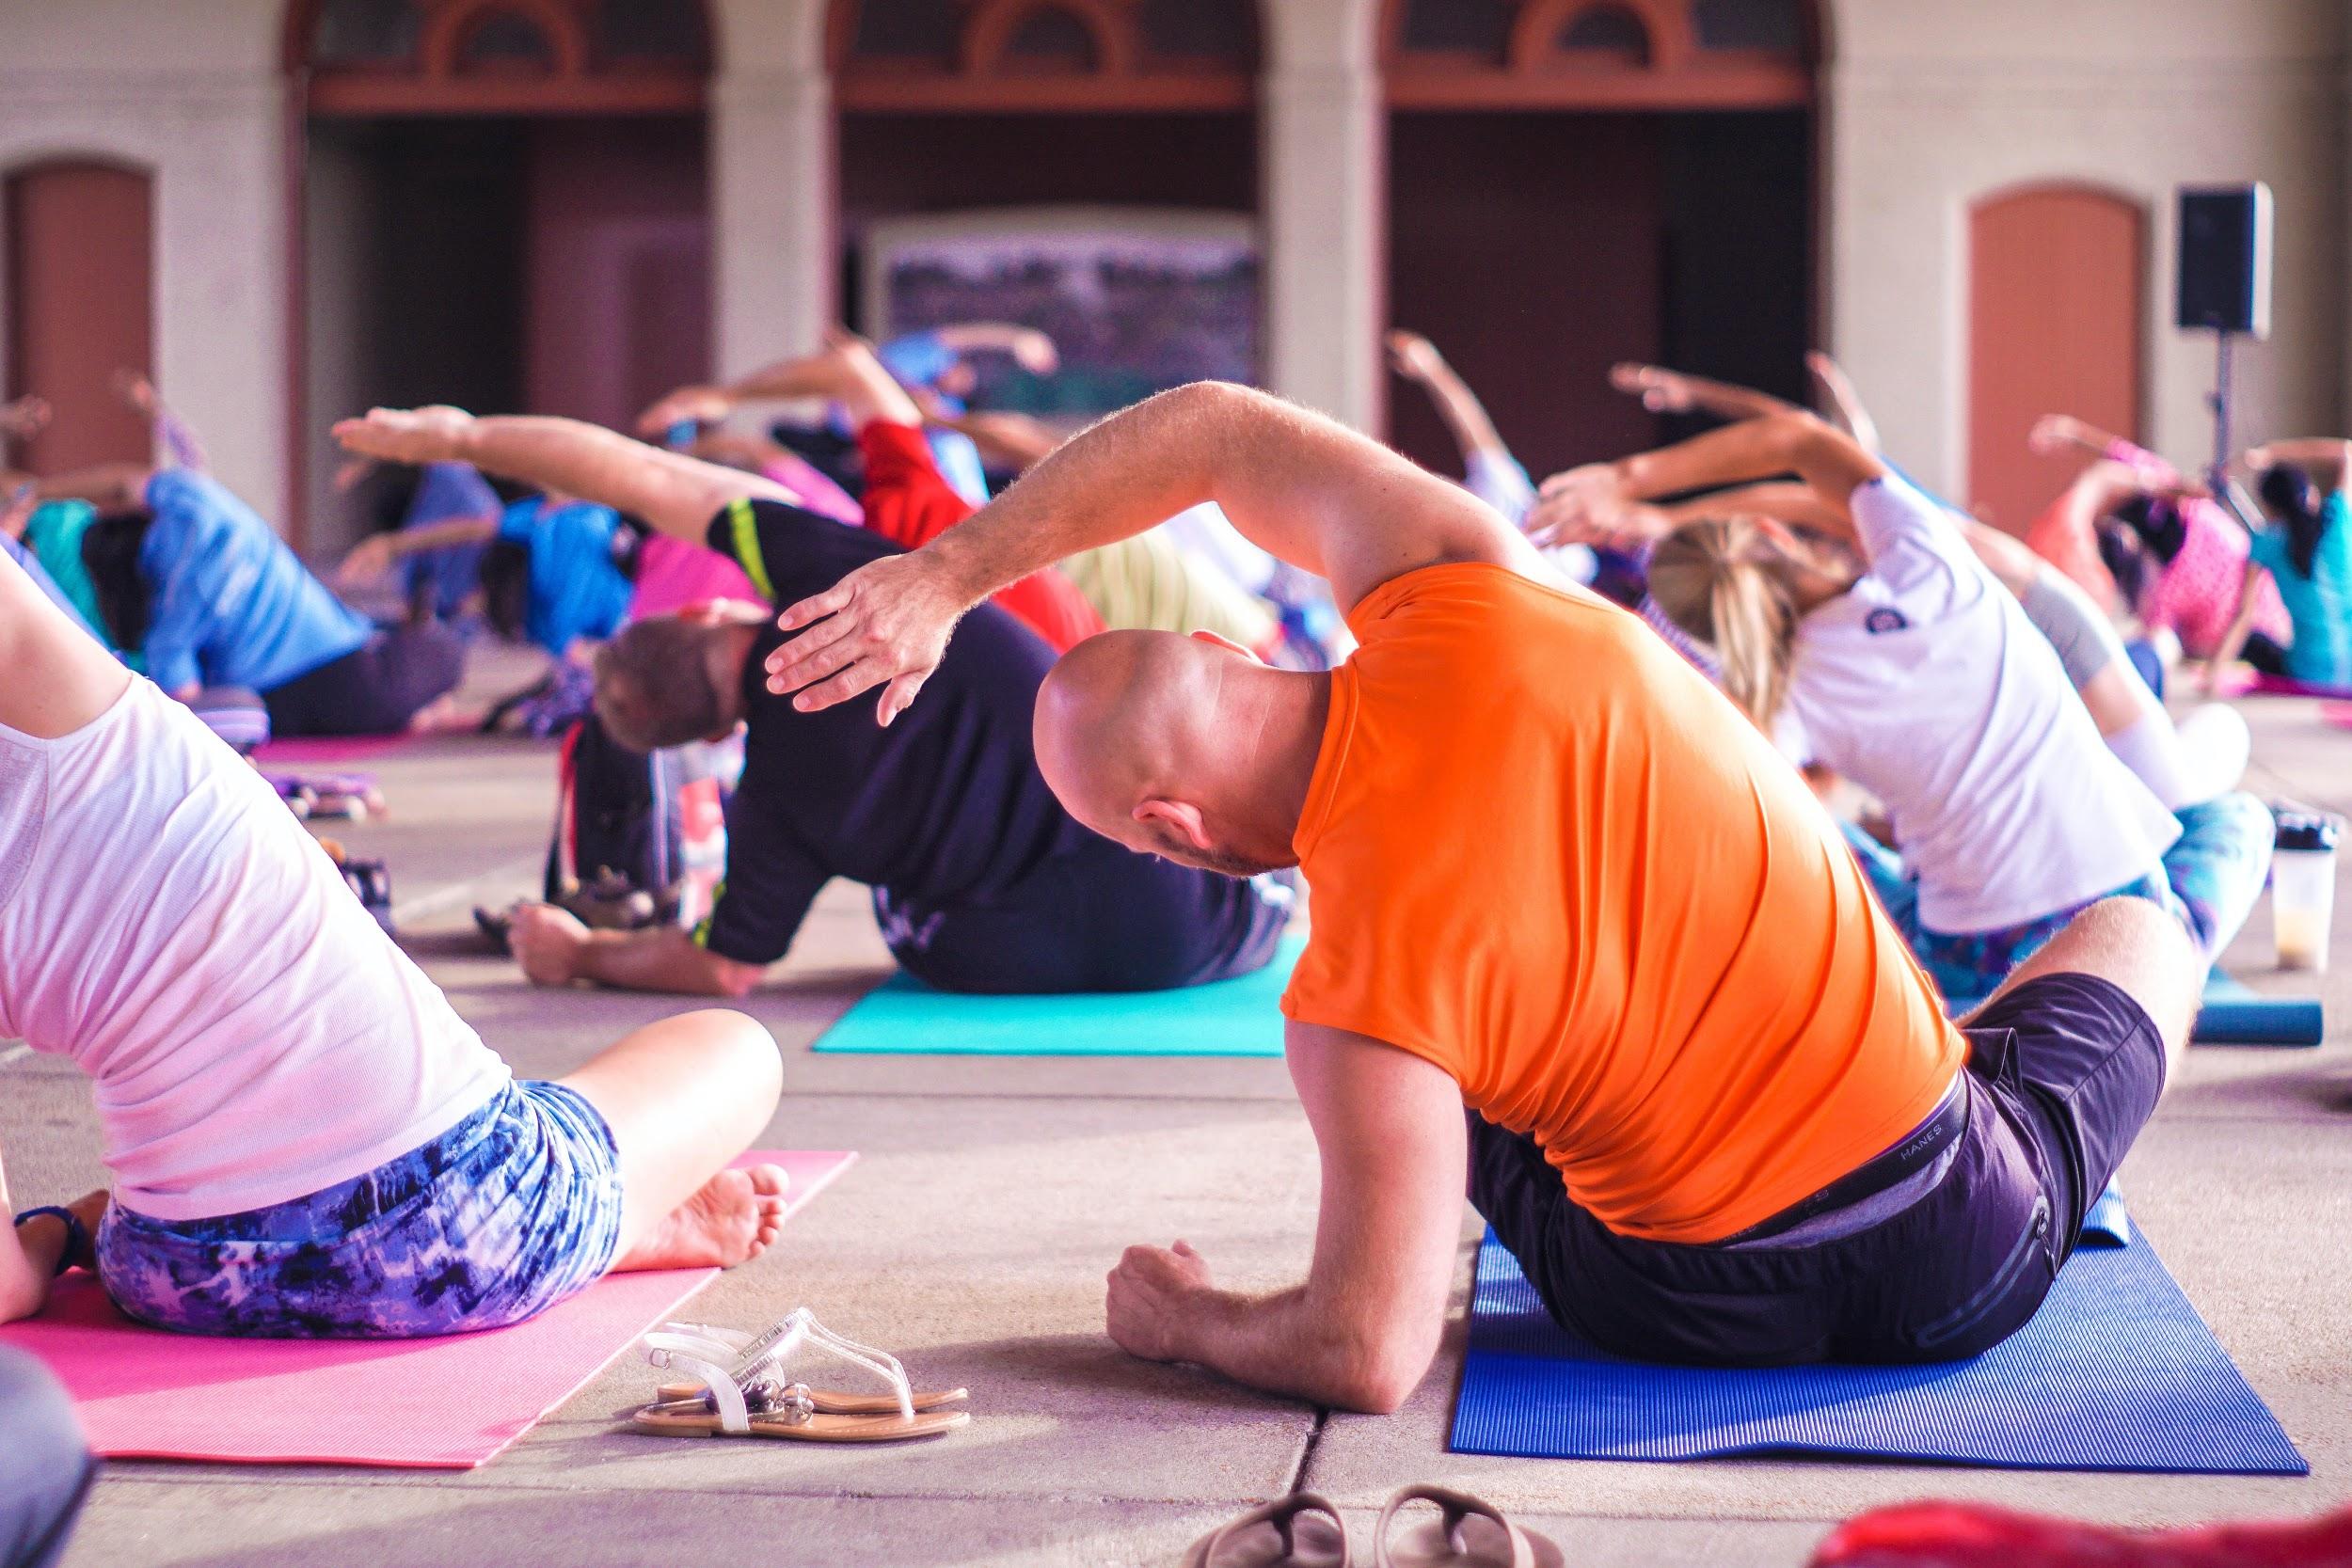 A group of people are shown sitting on yoga mats and participating in a stretching exercise.